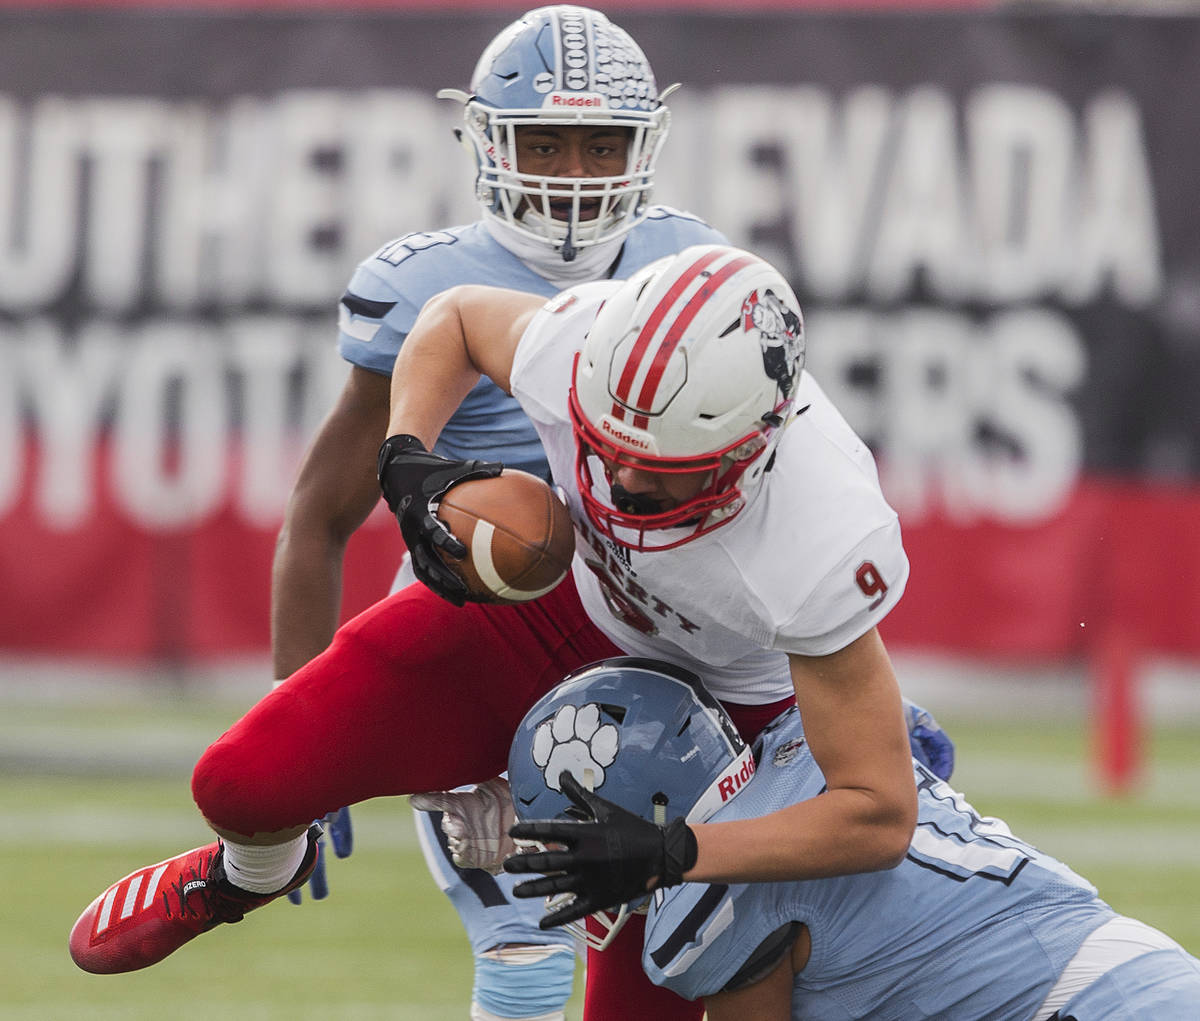 Liberty junior tight end Moliki Matavao (9) fights for yardage while being tackled by Centennia ...